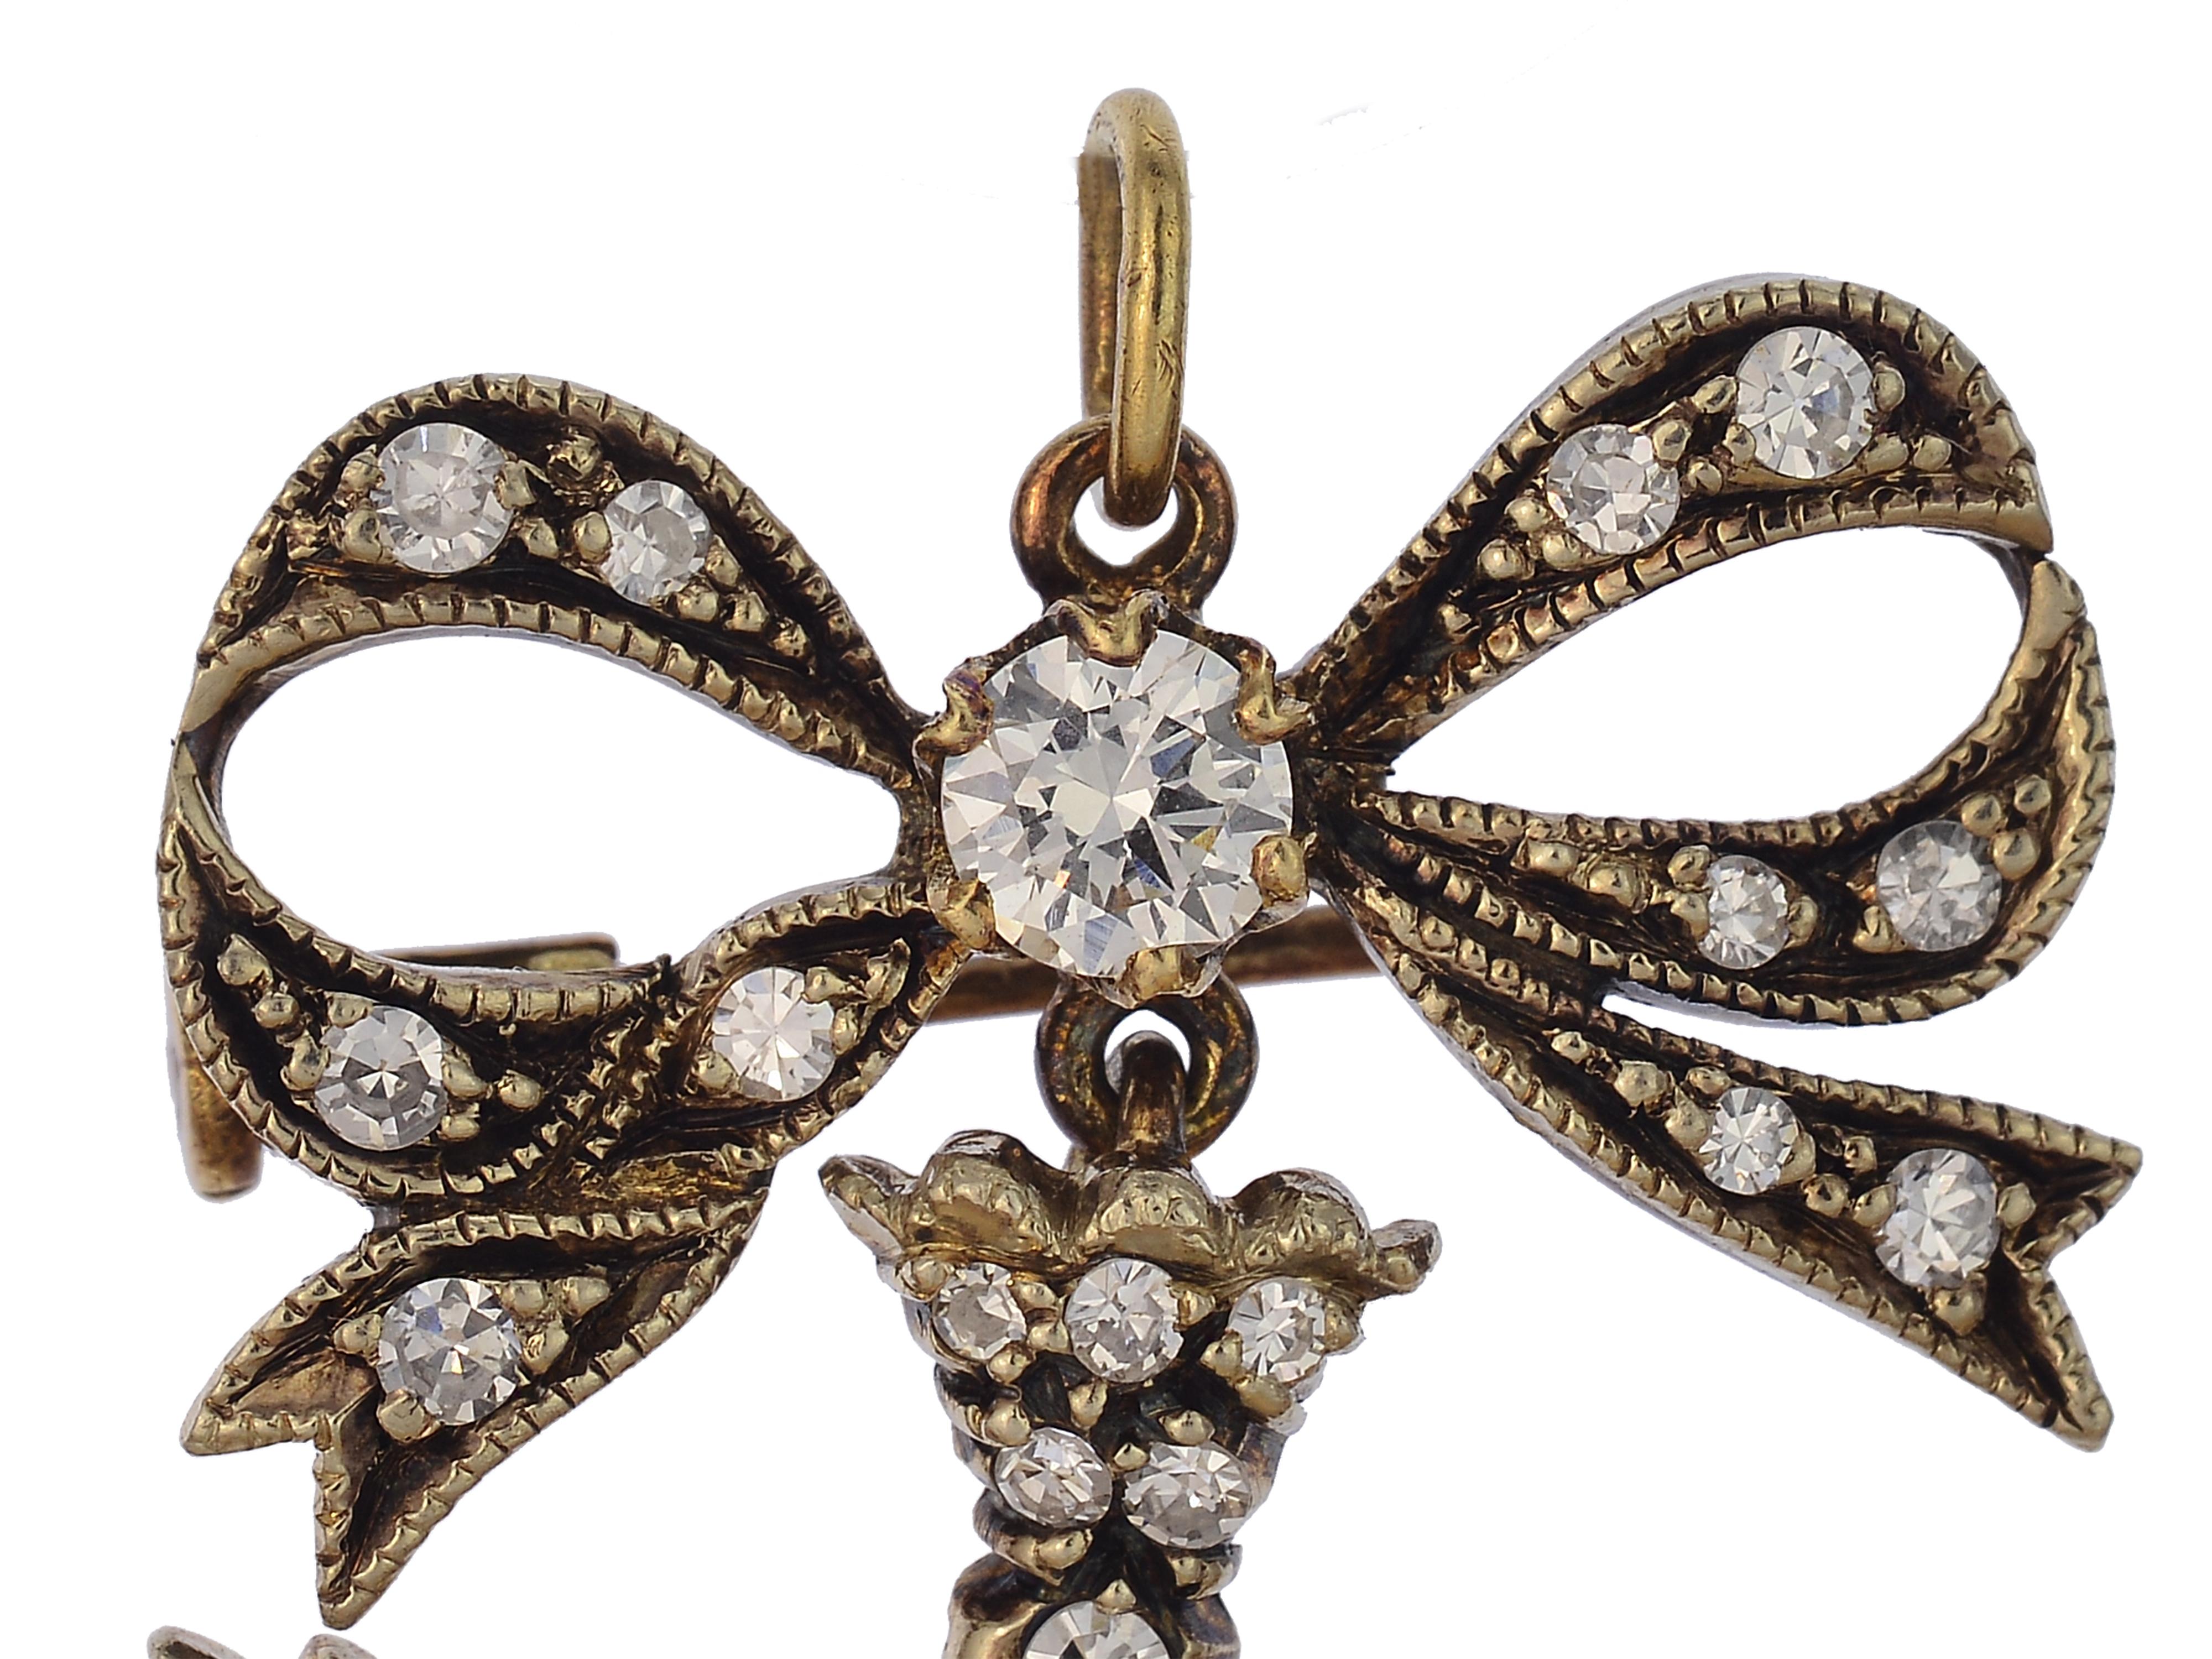 18 Karat Yellow Gold Convertible Pendant With 40 Round Brilliant & Single Cut Diamonds Totaling Approximately 1 Carat Total Weight VS Clarity & G Color Diamonds, 9 Seed Pearls, and 2 Ruby Eyes. The Pendant Also Features a Brooch Mechanism.